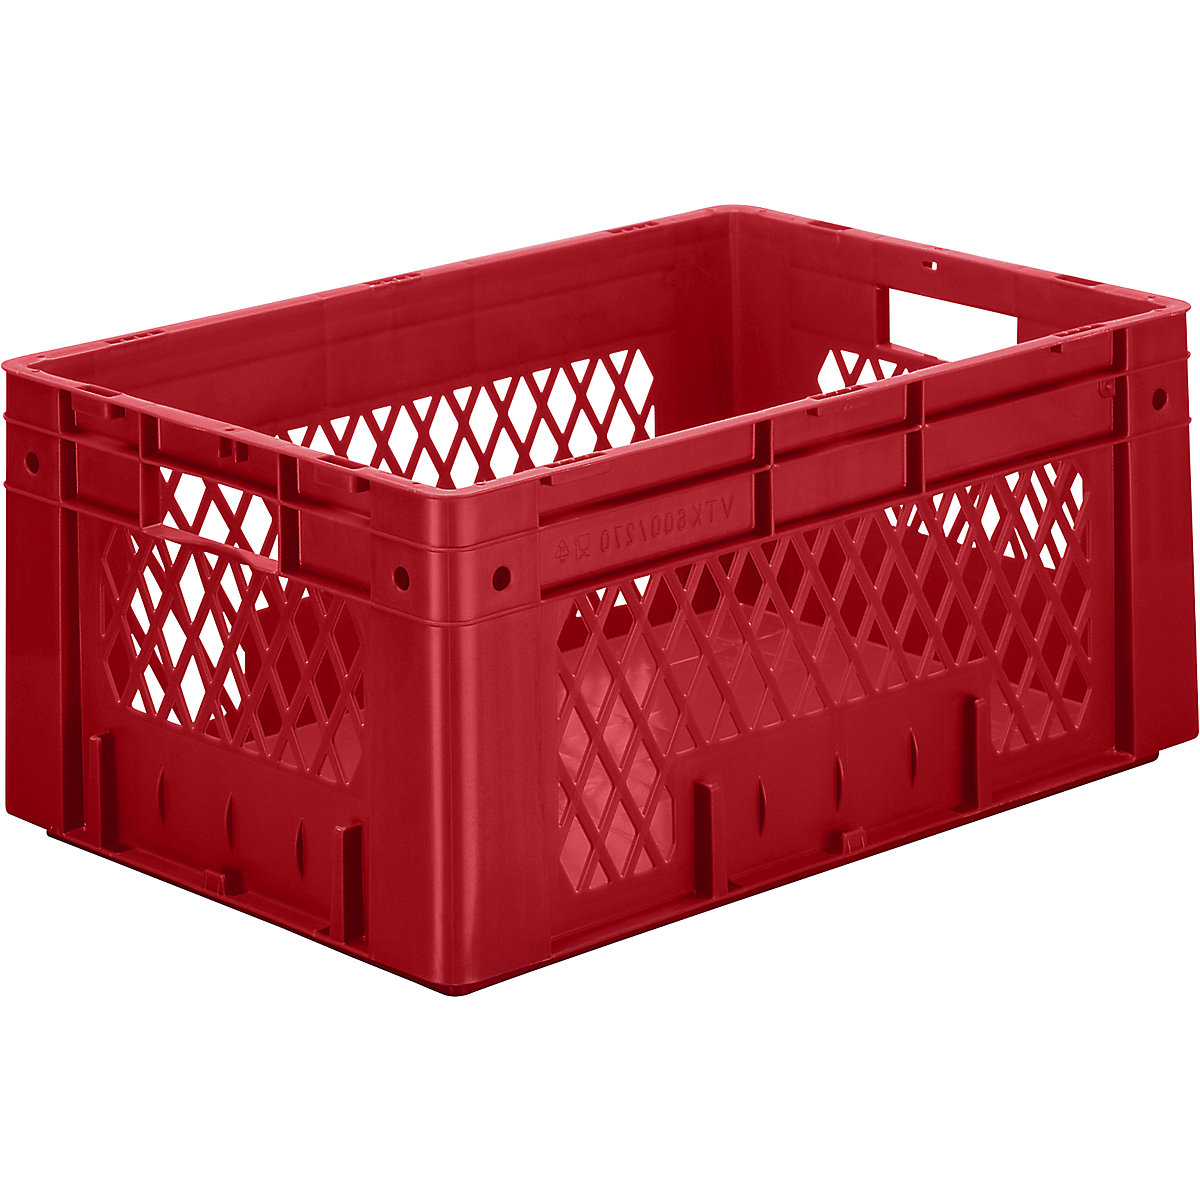 Heavy duty Euro container, polypropylene, capacity 50 l, LxWxH 600 x 400 x 270 mm, perforated walls, solid base, red, pack of 2-4